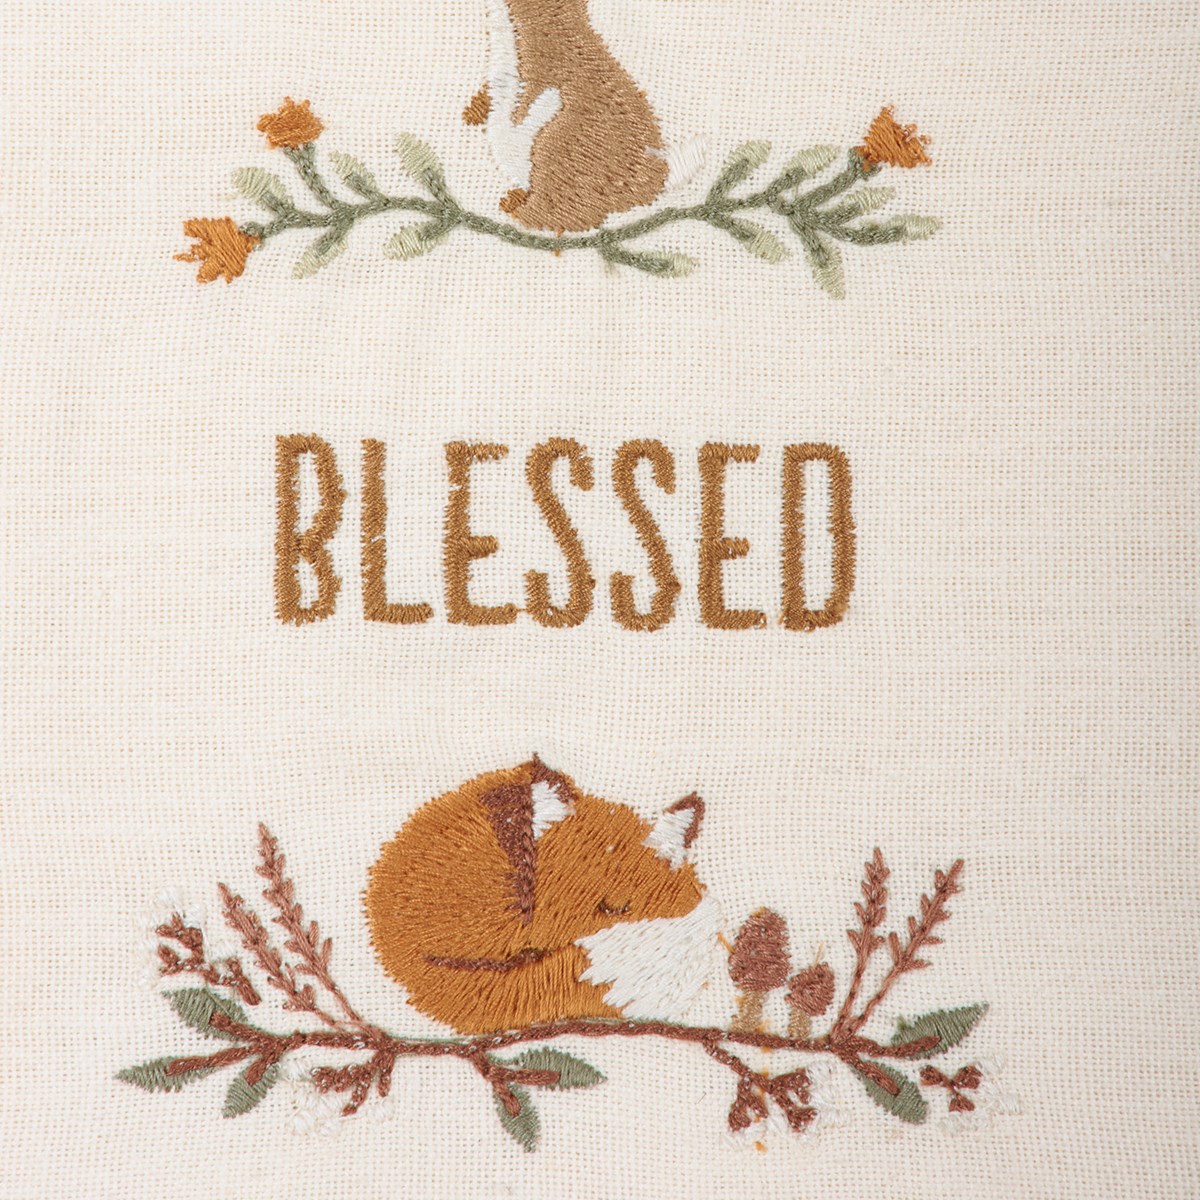 Thankful Grateful Blessed Embroidered Kitchen Towel - Cotton, Linen